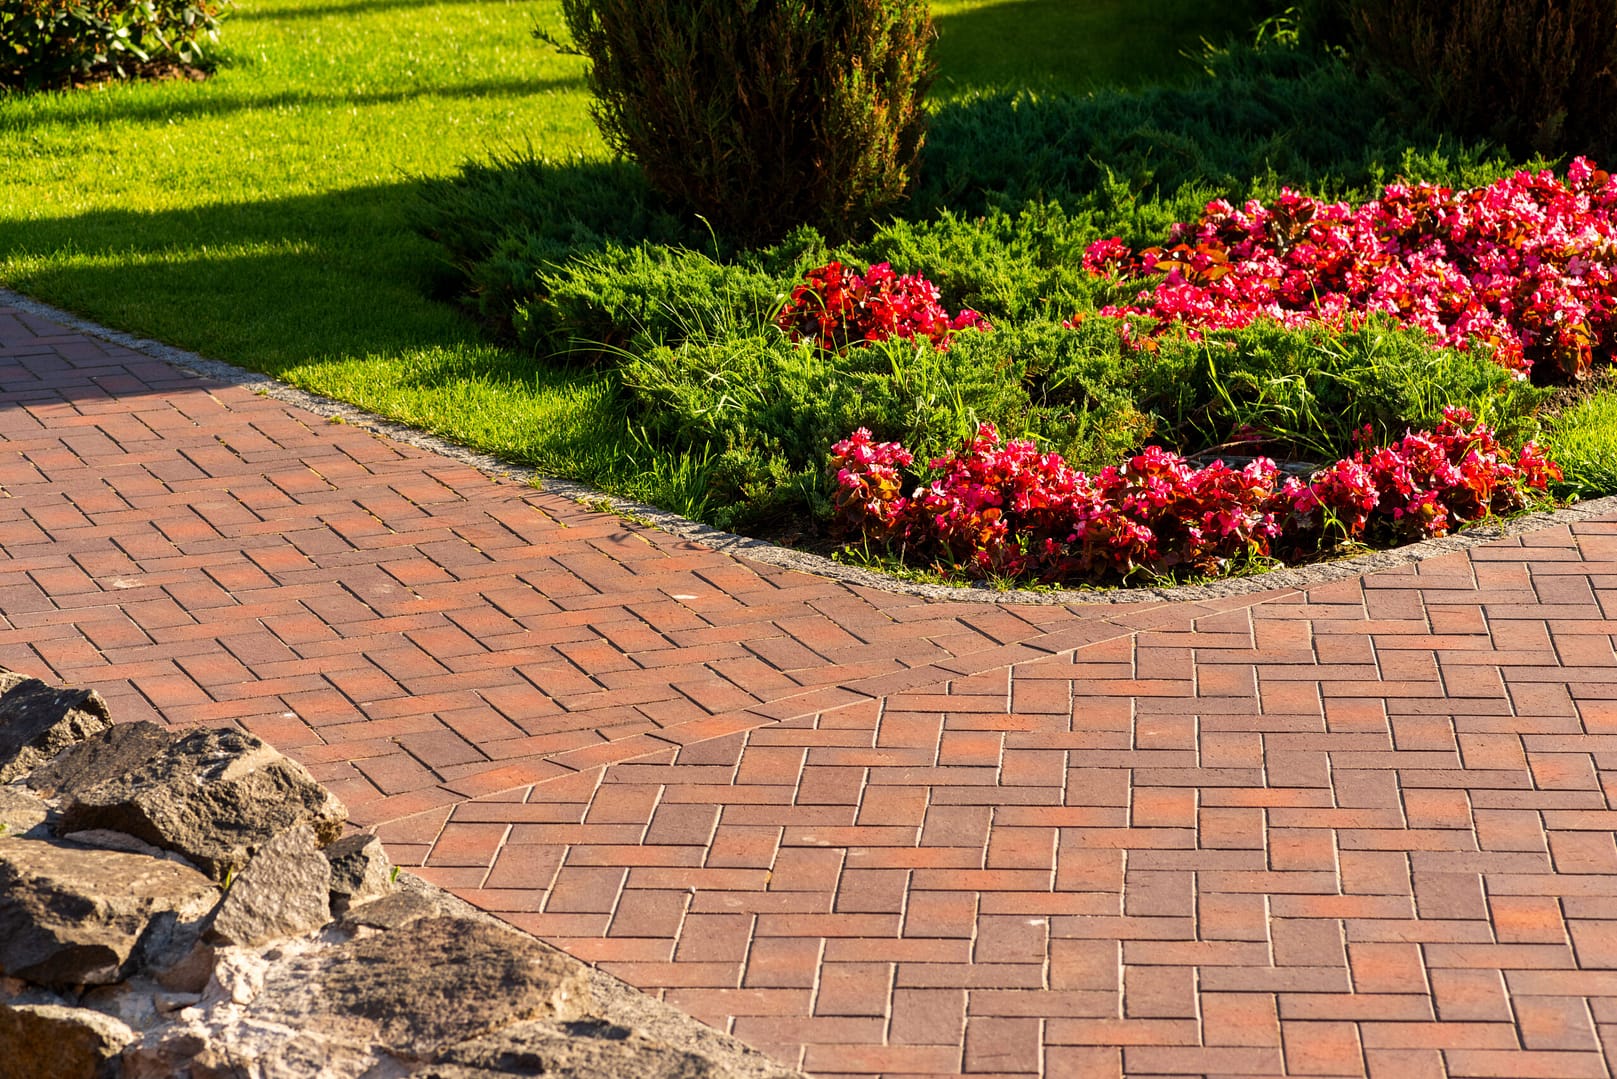 Cobblestone pathway edged by a meticulously manicured garden of flowers and grass – showcasing the precision that digital landscapers marketing brings to targeting the right audience.